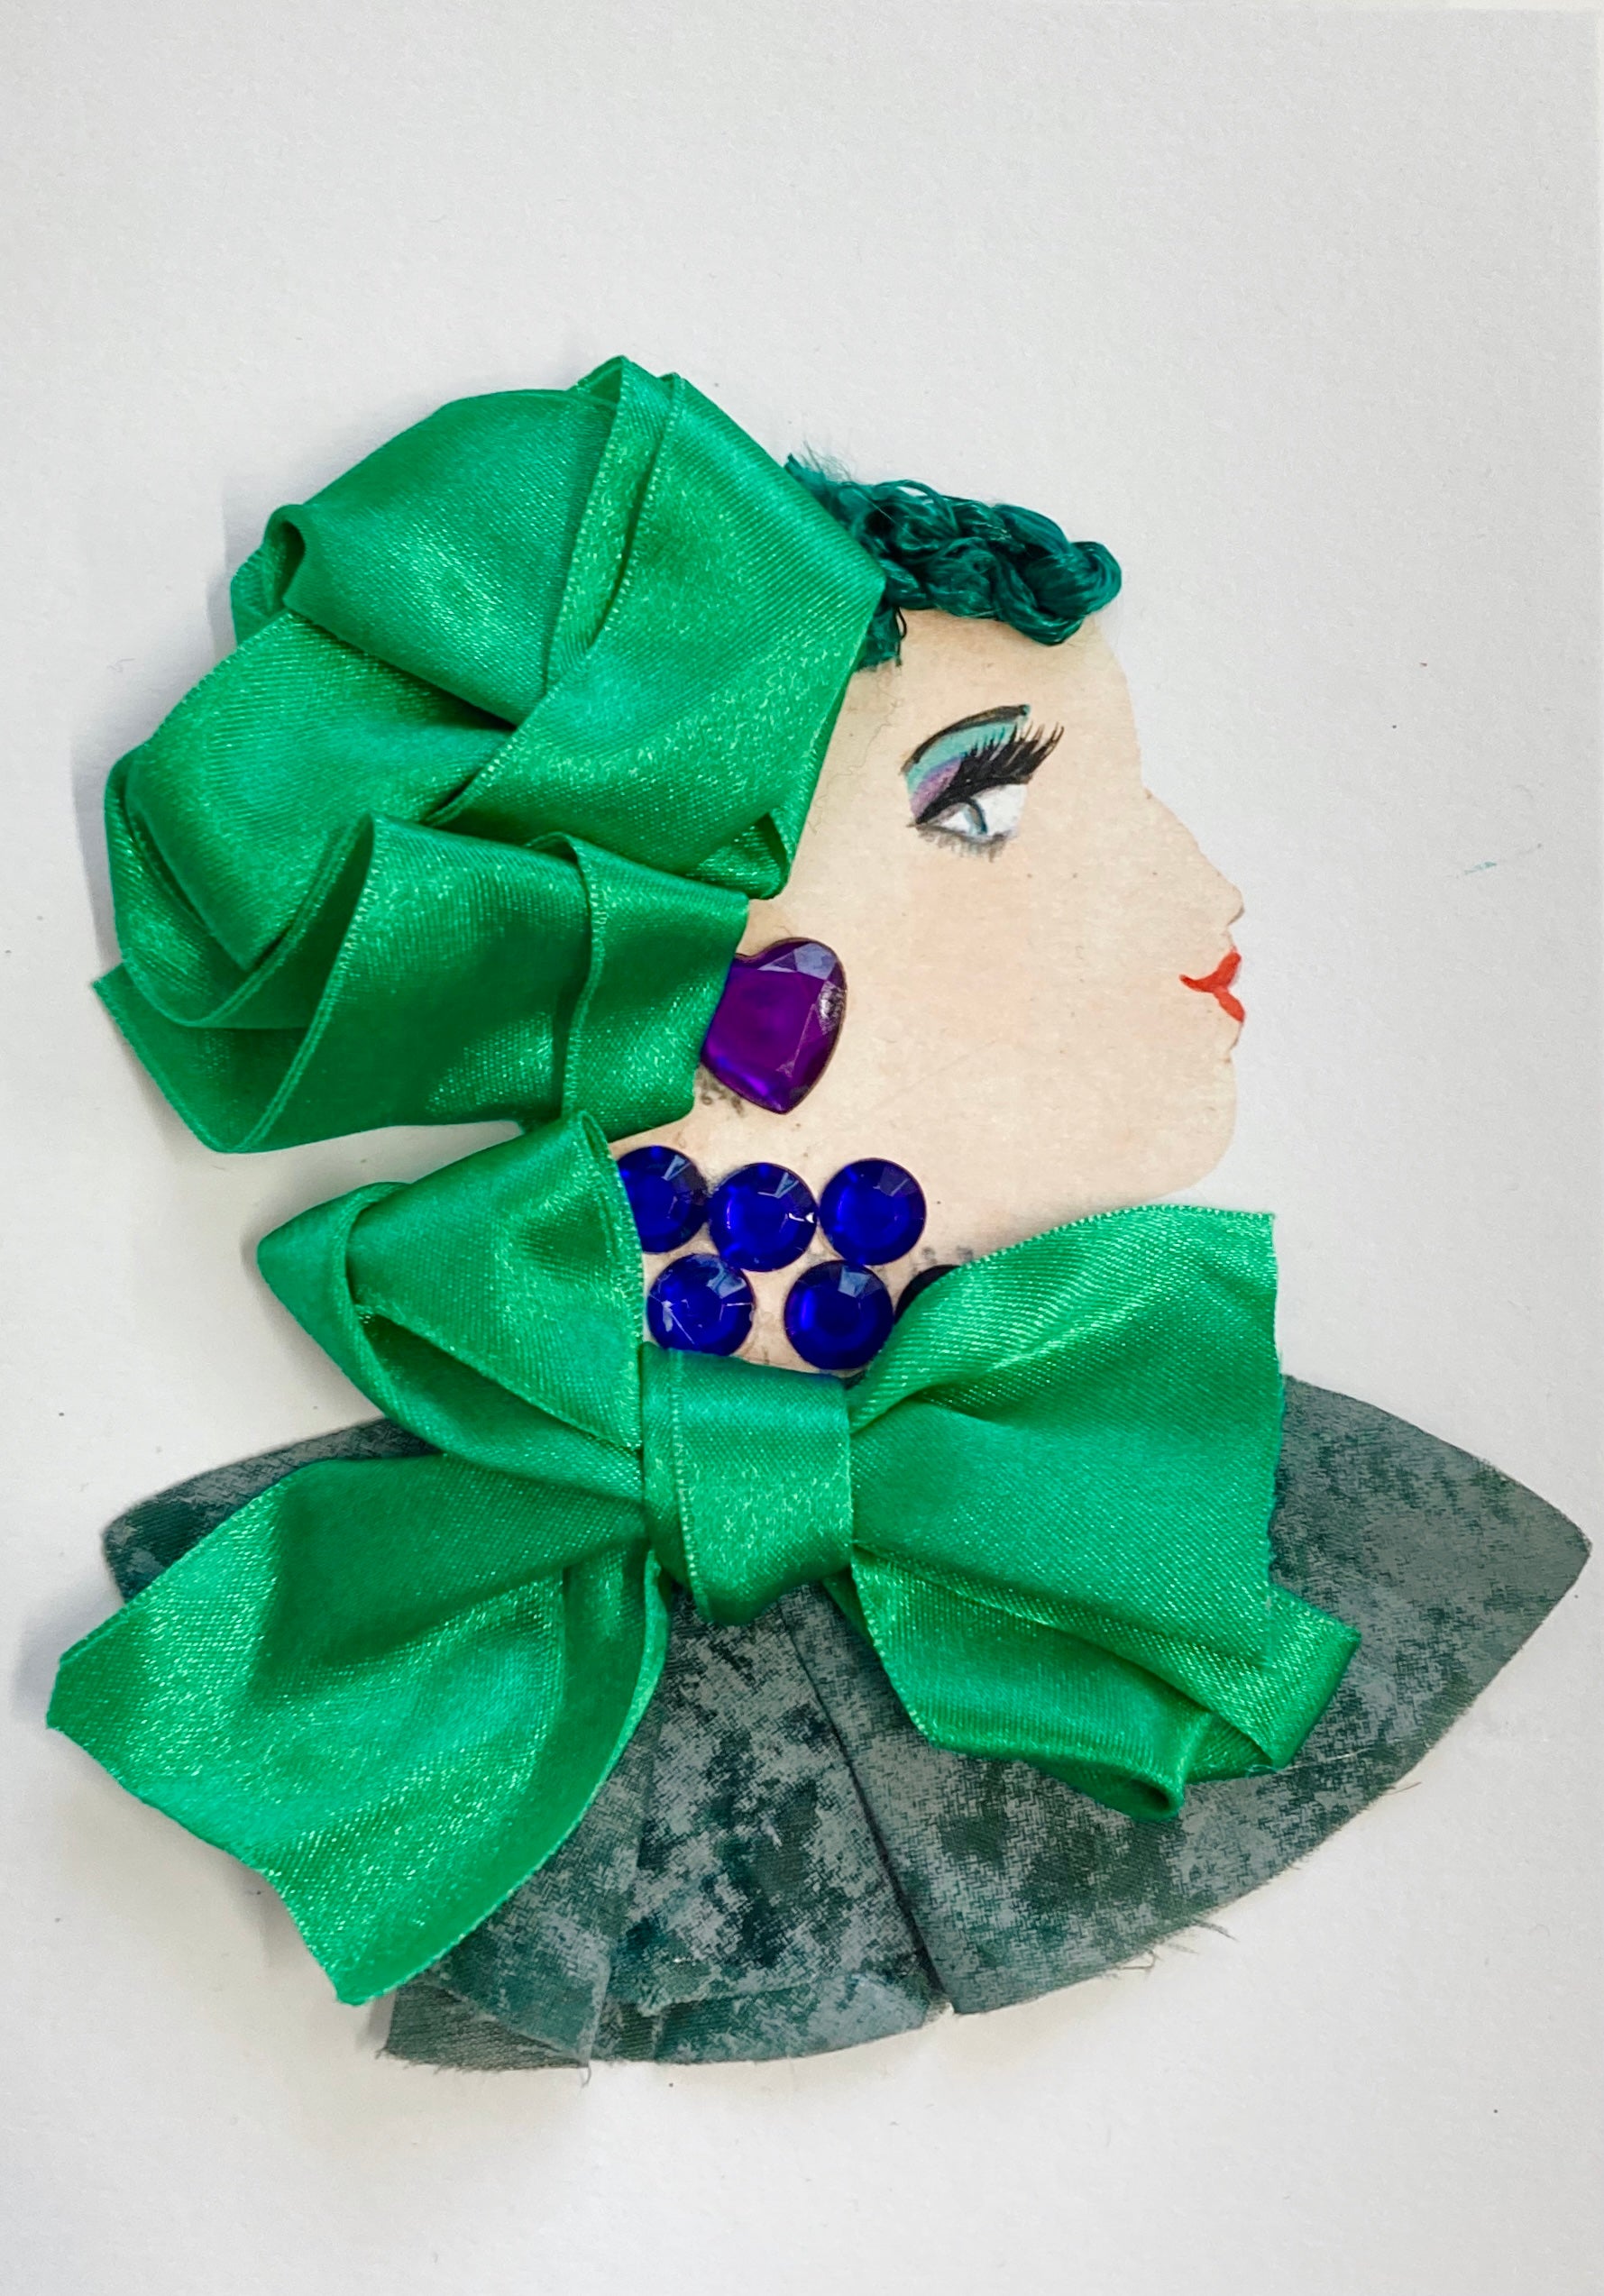 This card depicts a woman given the name Esmarelda. She wears a dark green textured blouse with a massive green bow at the neck. Her necklace is made of dark blue gems, and her earring is a purple heart gem. Her hair scarf is the same fabric as the bow on her dress. 